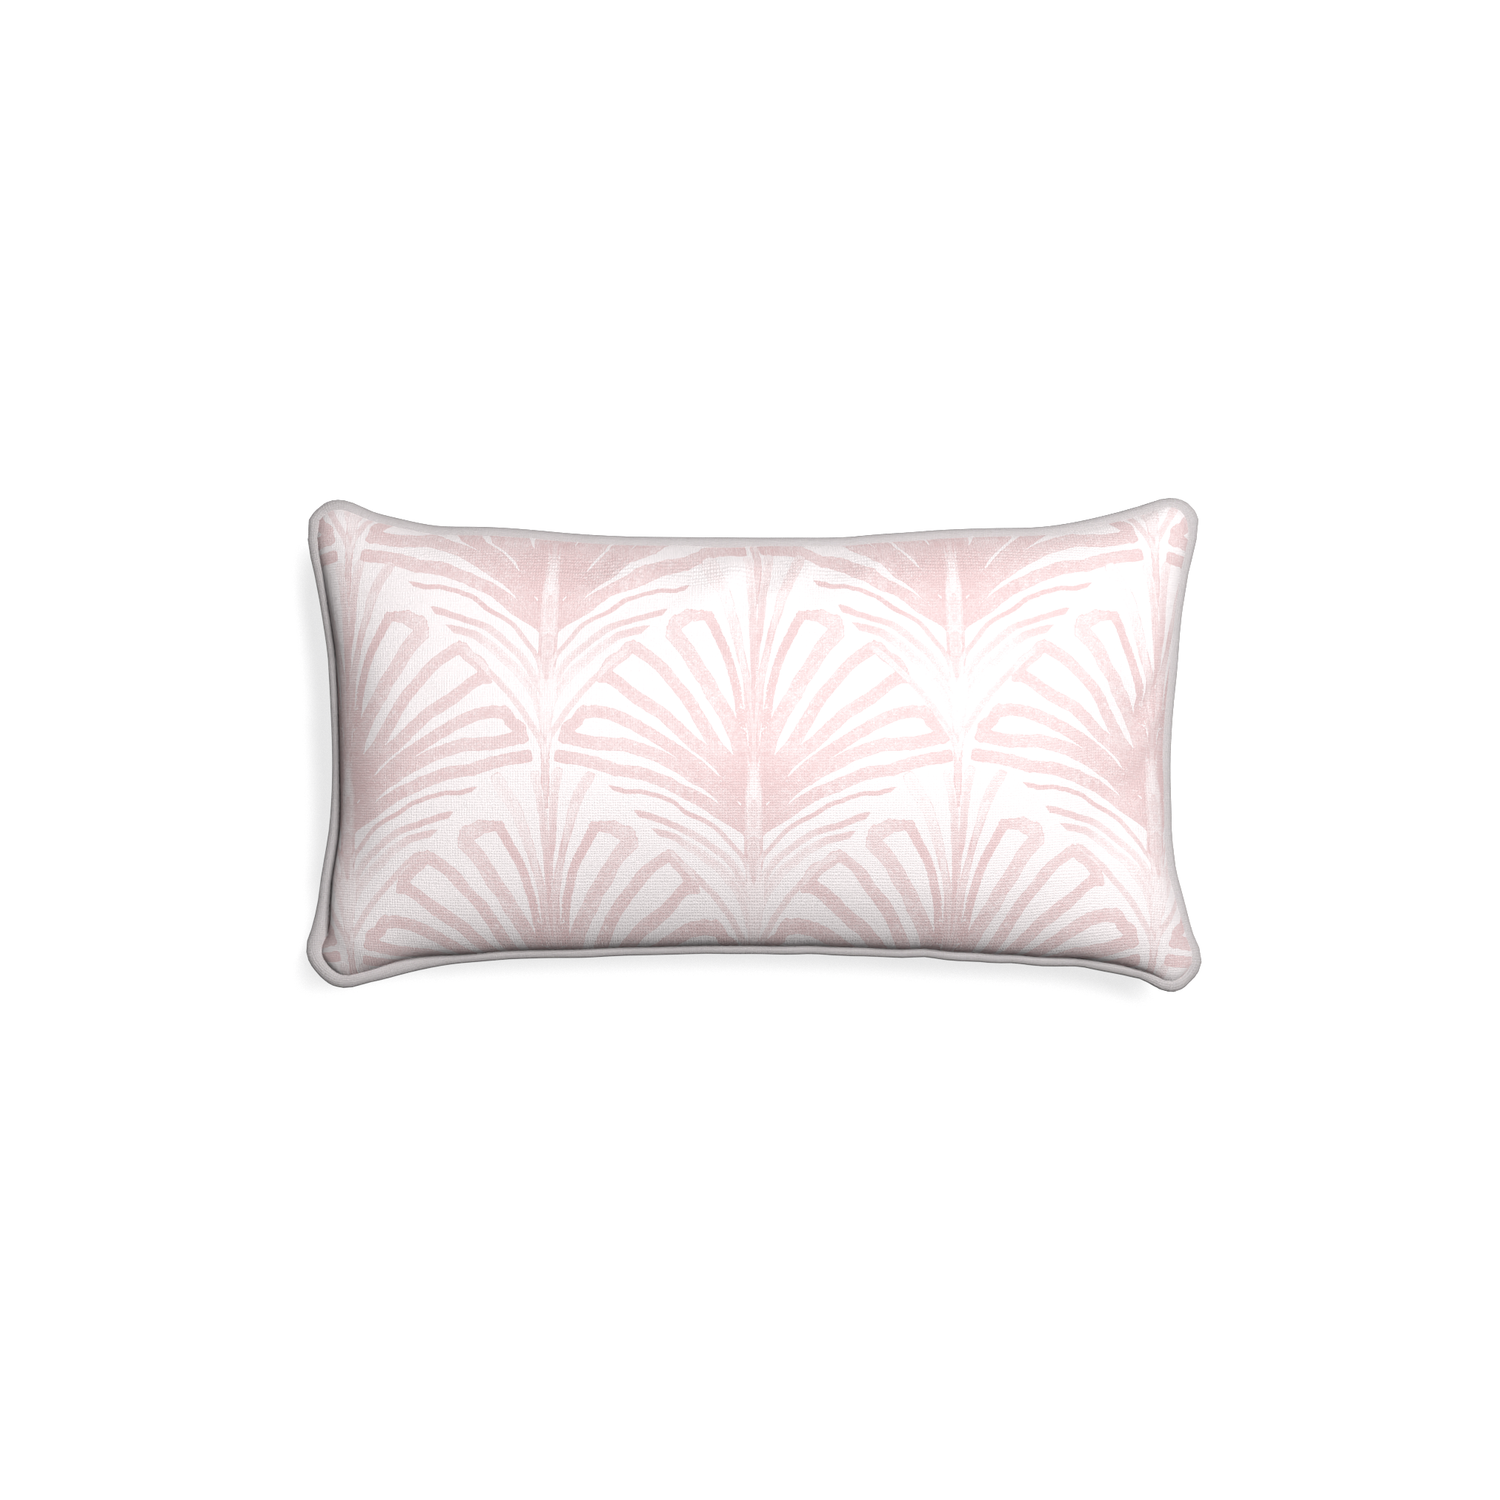 Petite-lumbar suzy rose custom rose pink palmpillow with pebble piping on white background